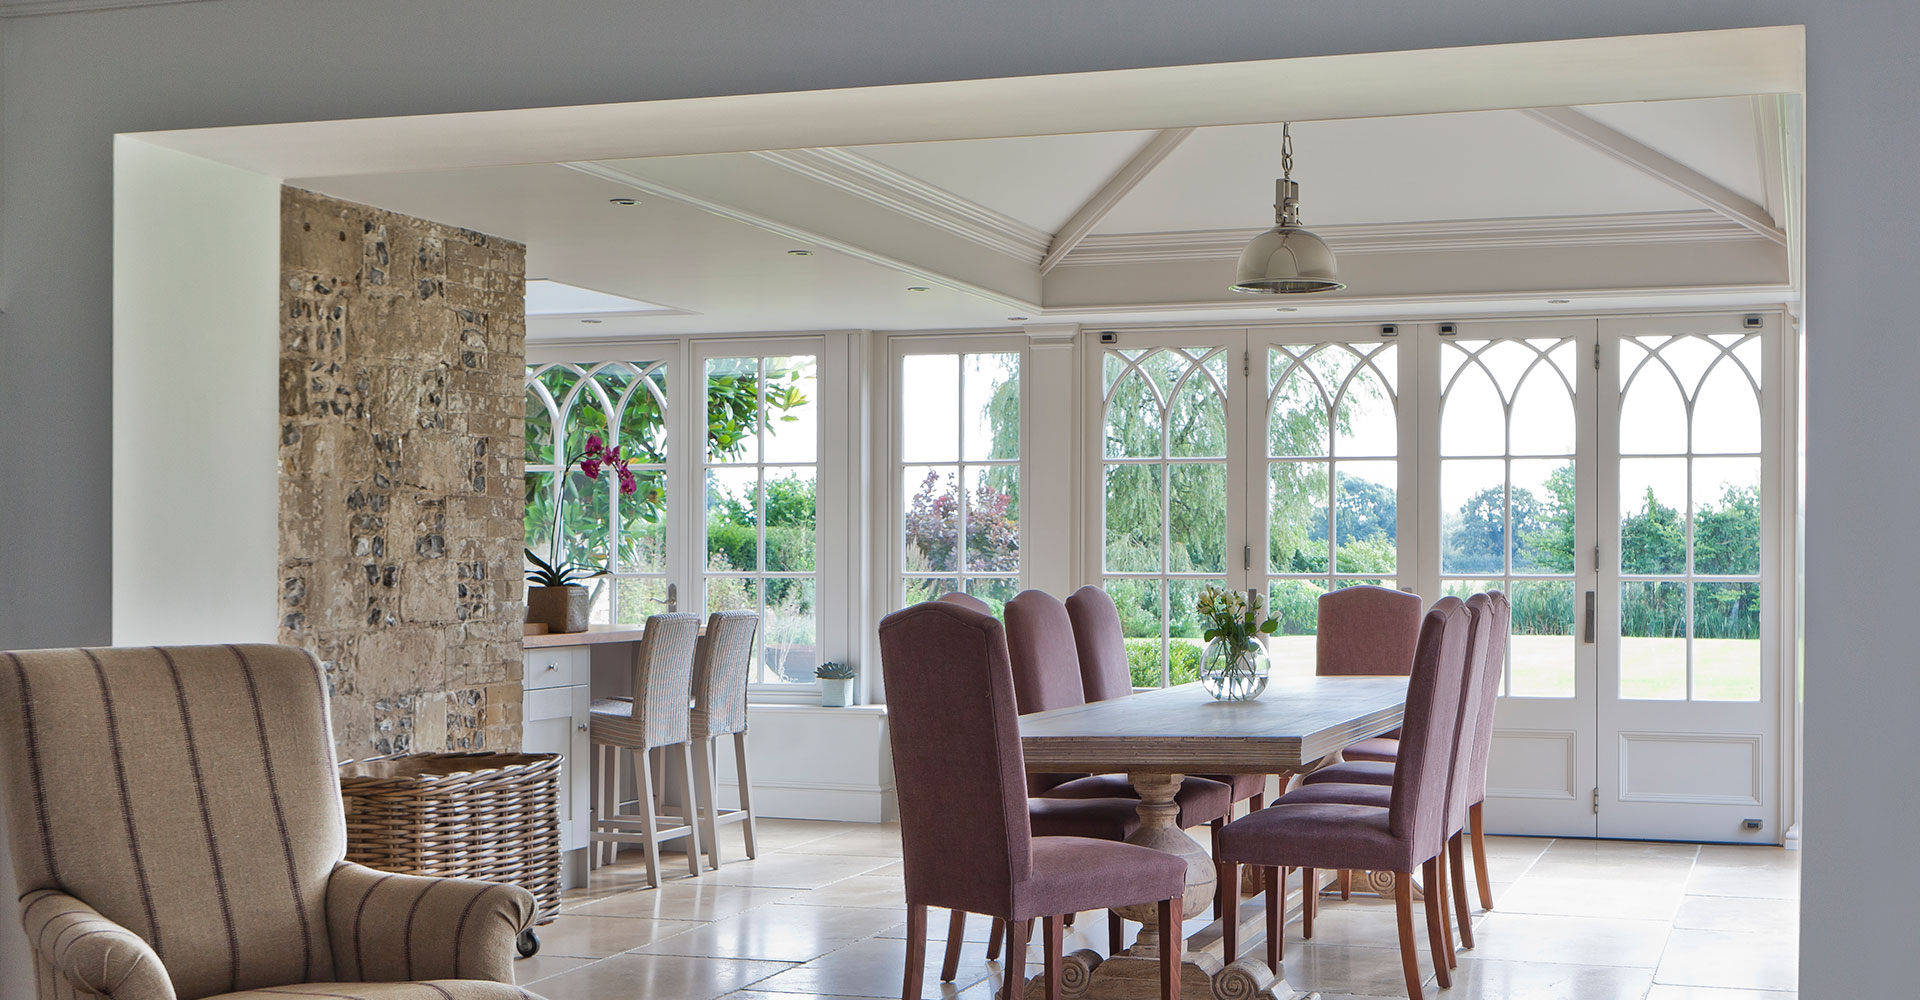 Example of a dining room orangery with a solid roof